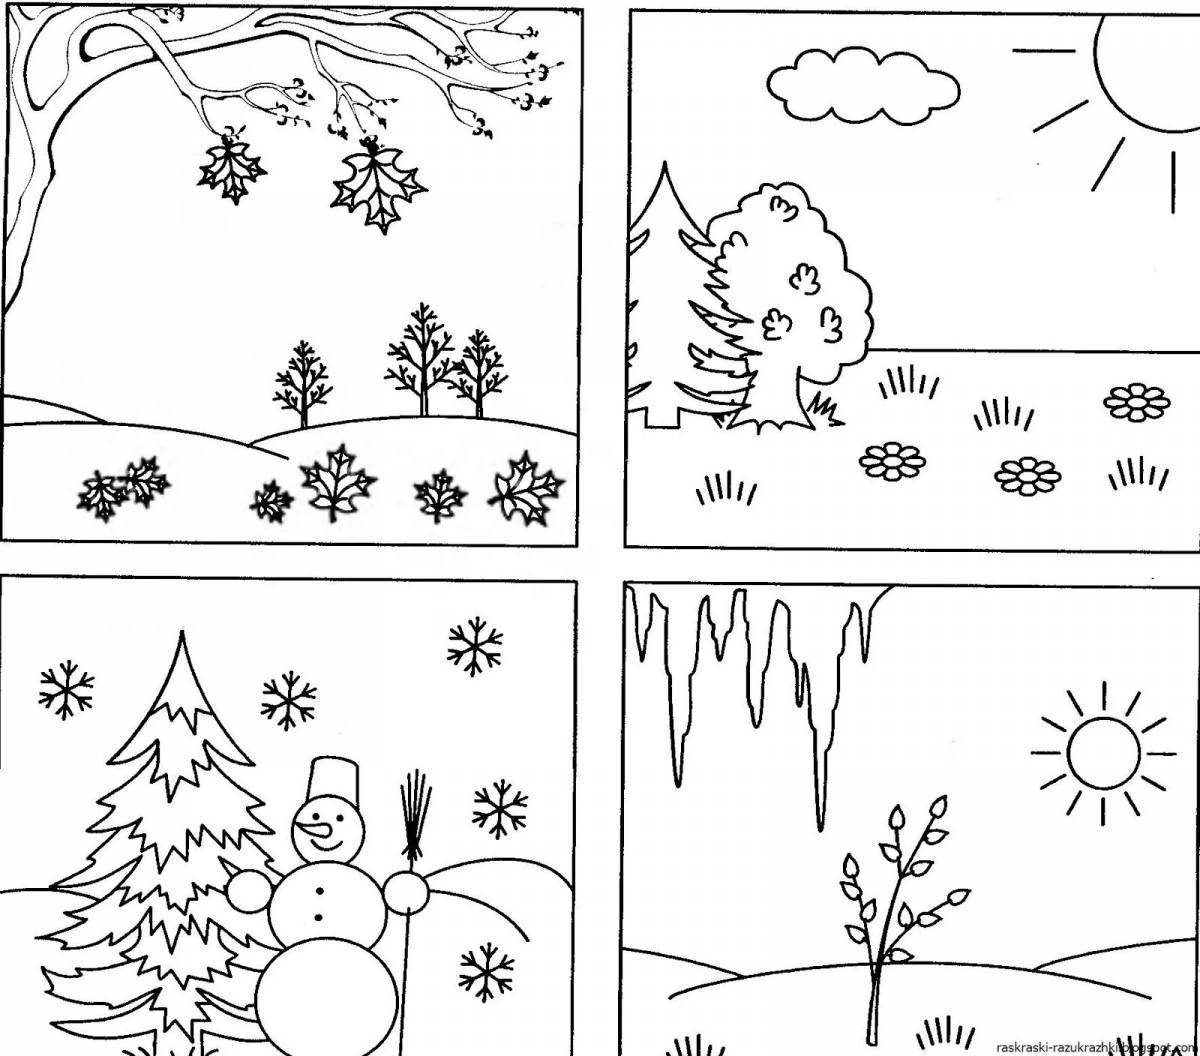 A fun summer coloring book for kids